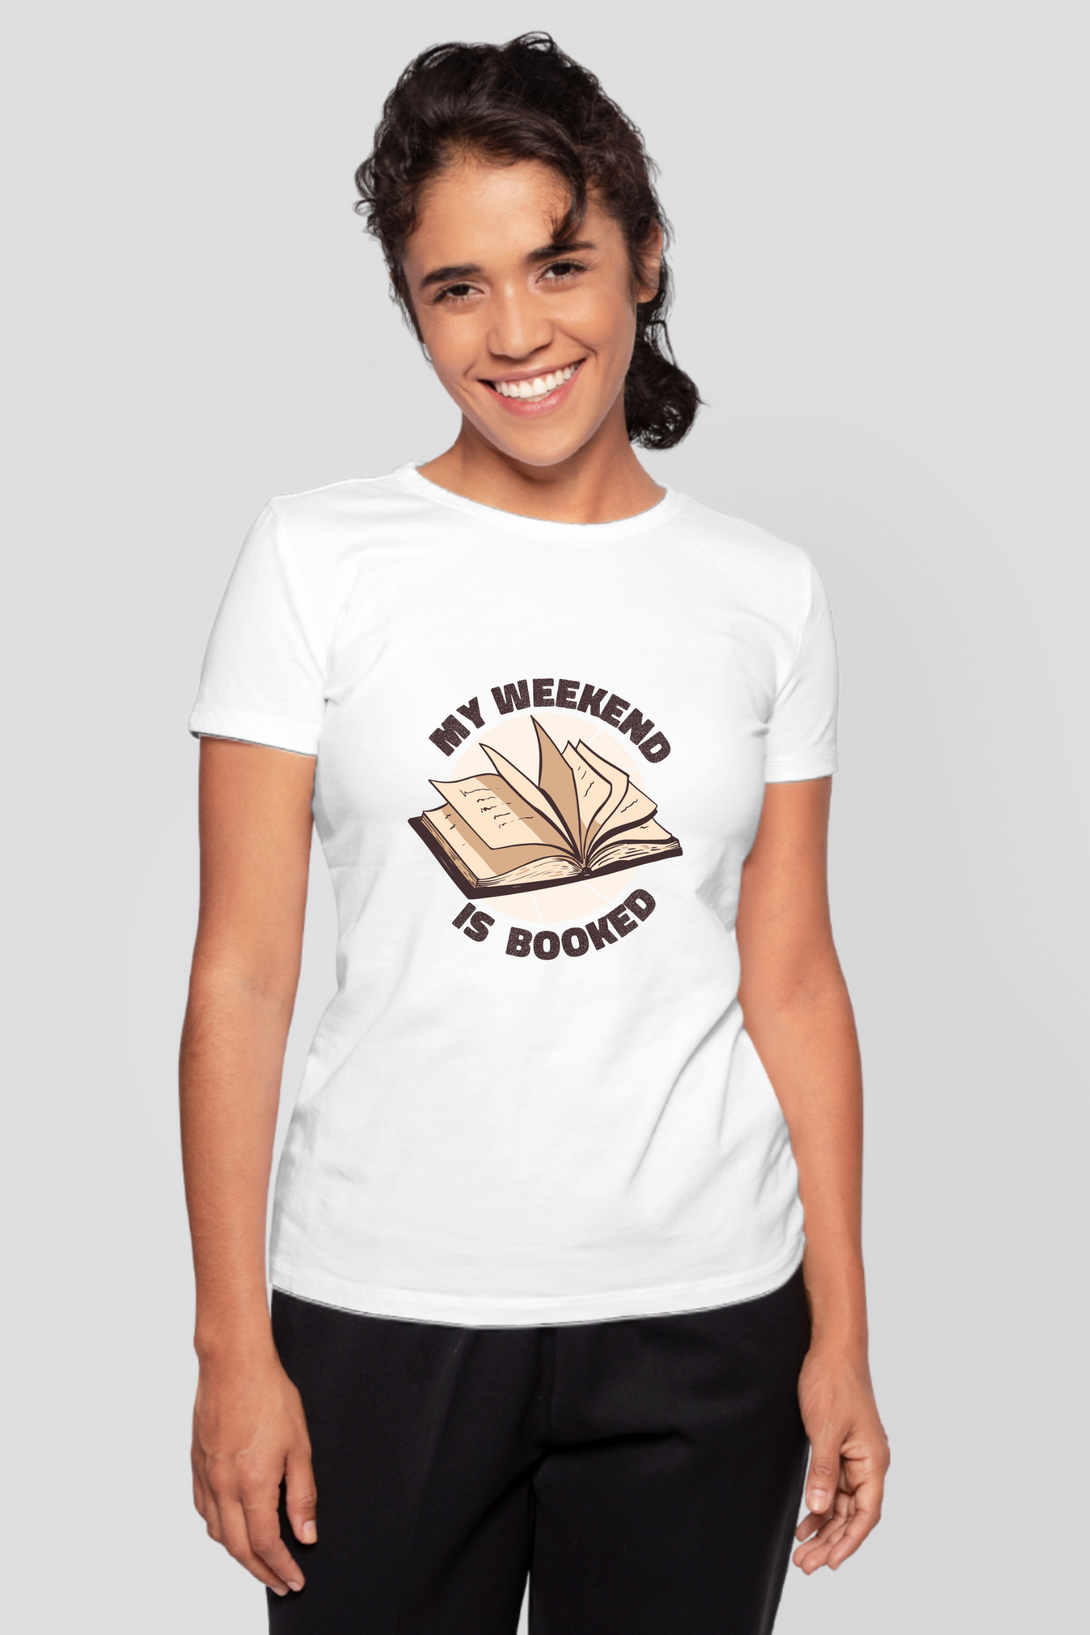 My Weekend Is Booked Printed T-Shirt For Women - WowWaves - 8